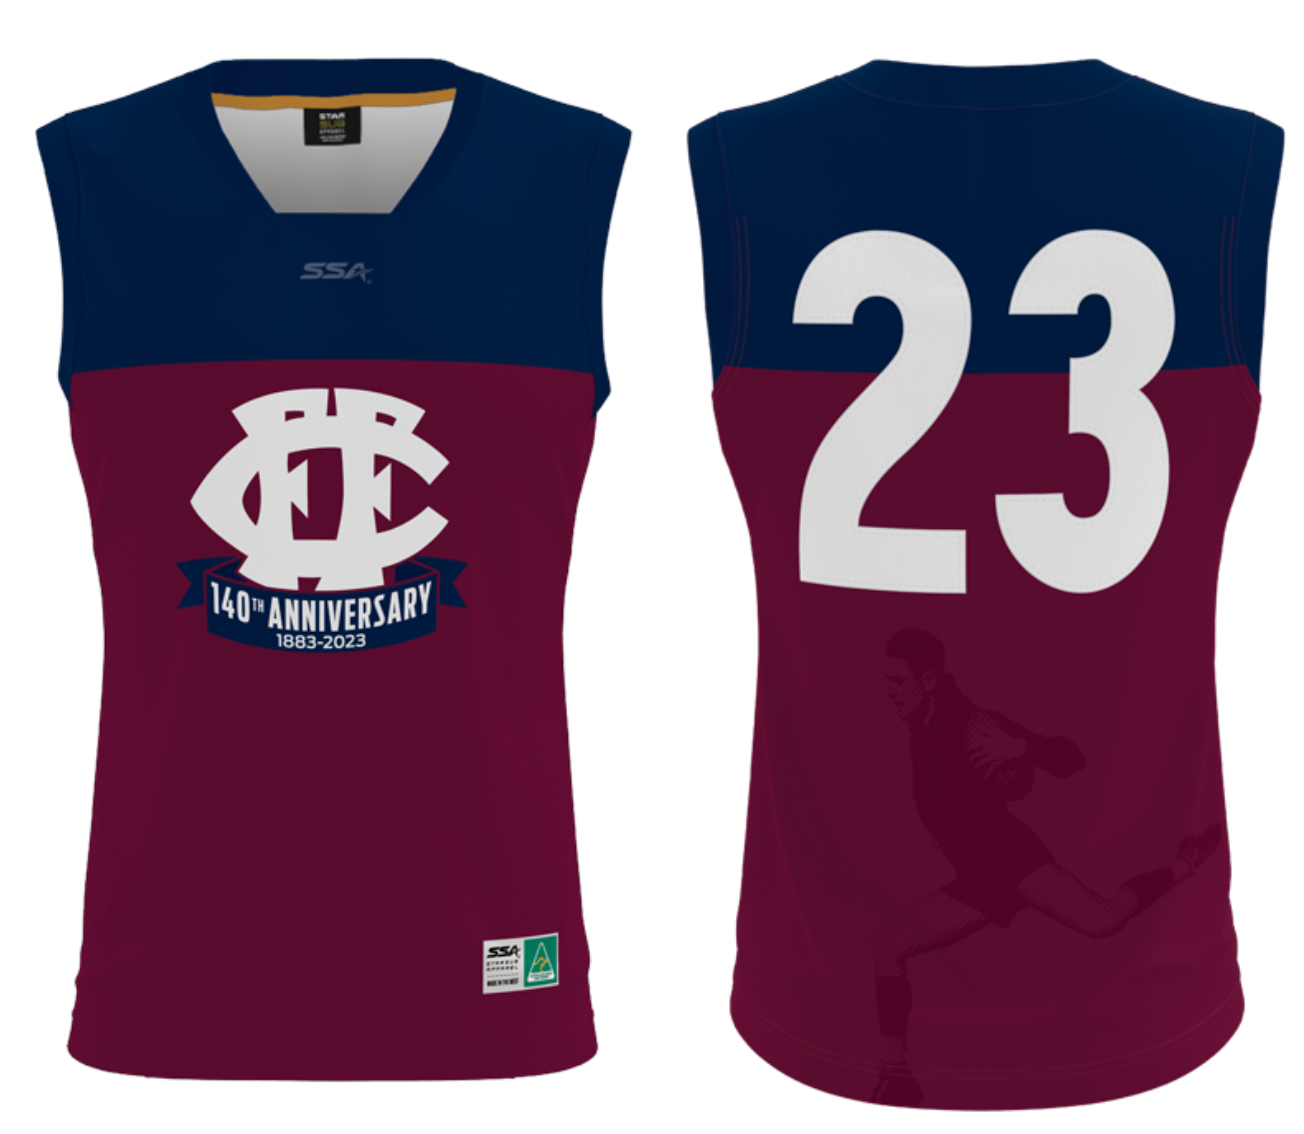 140th Anniversary Heritage Guernsey - Maroon & Blue